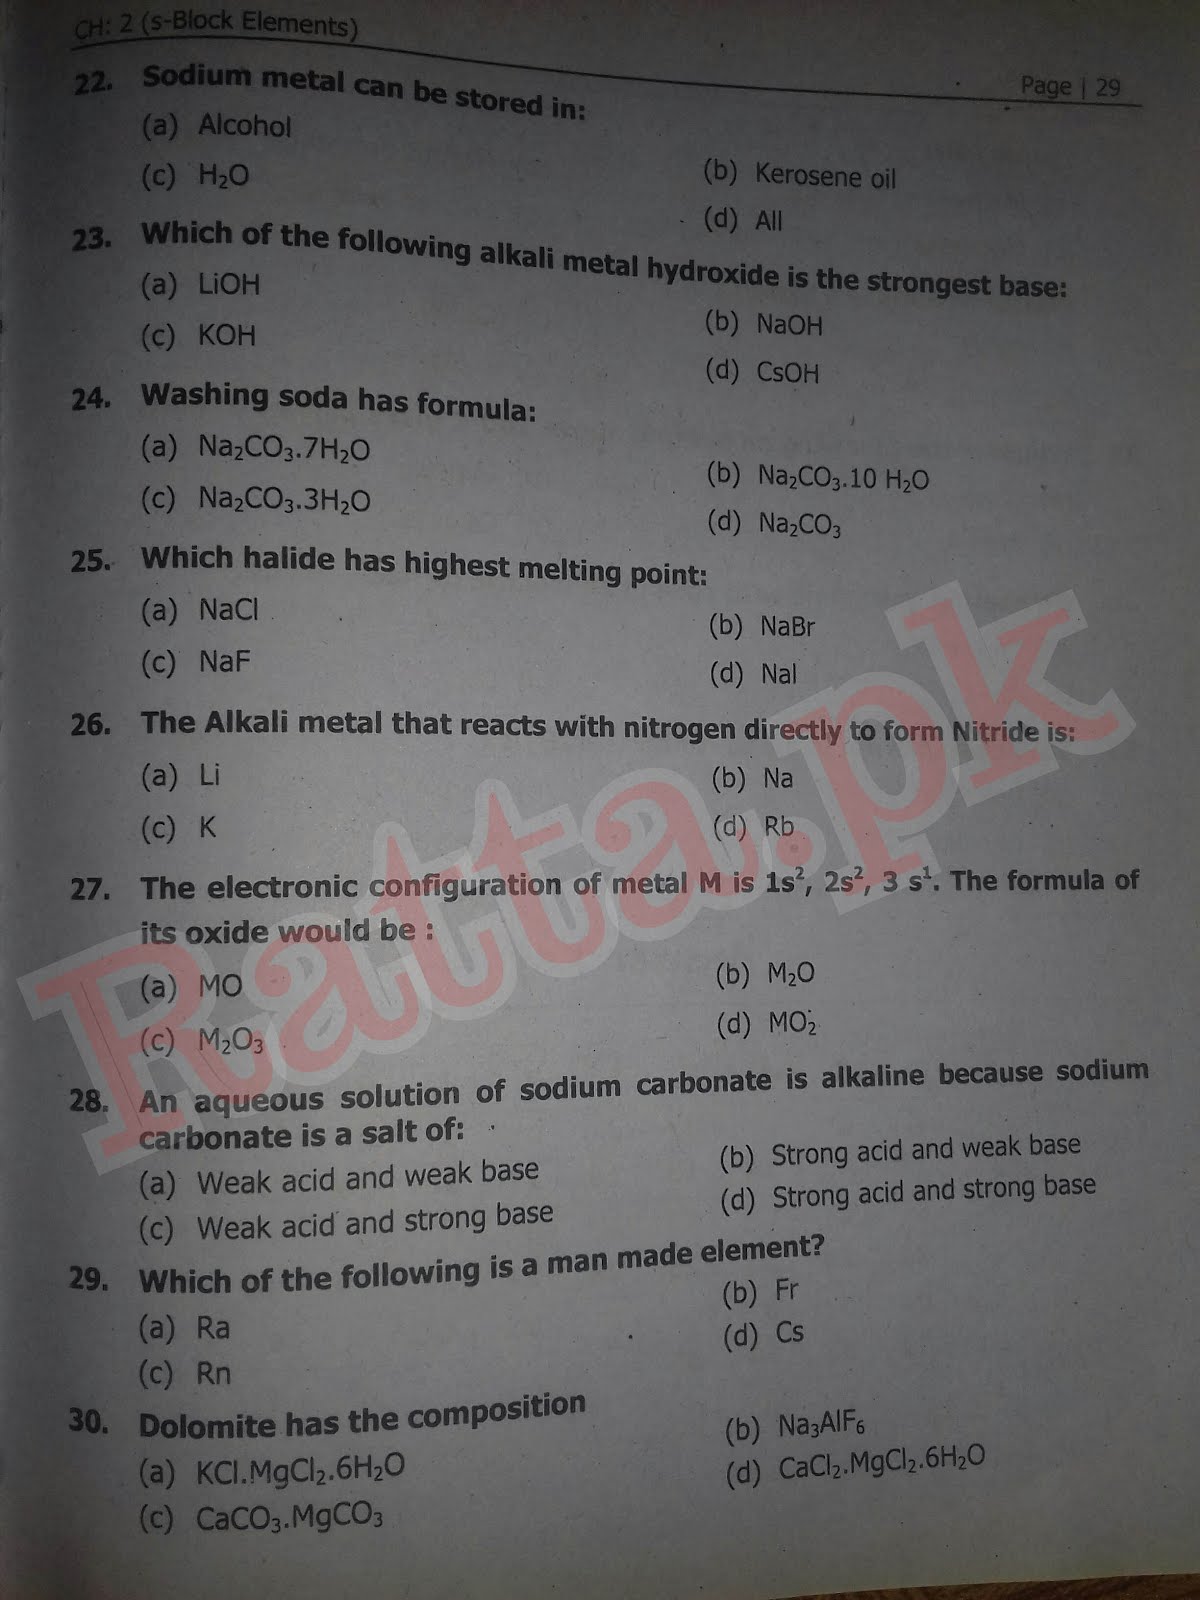 FSc 2nd Year Chemistry Chapter 2 mcqs